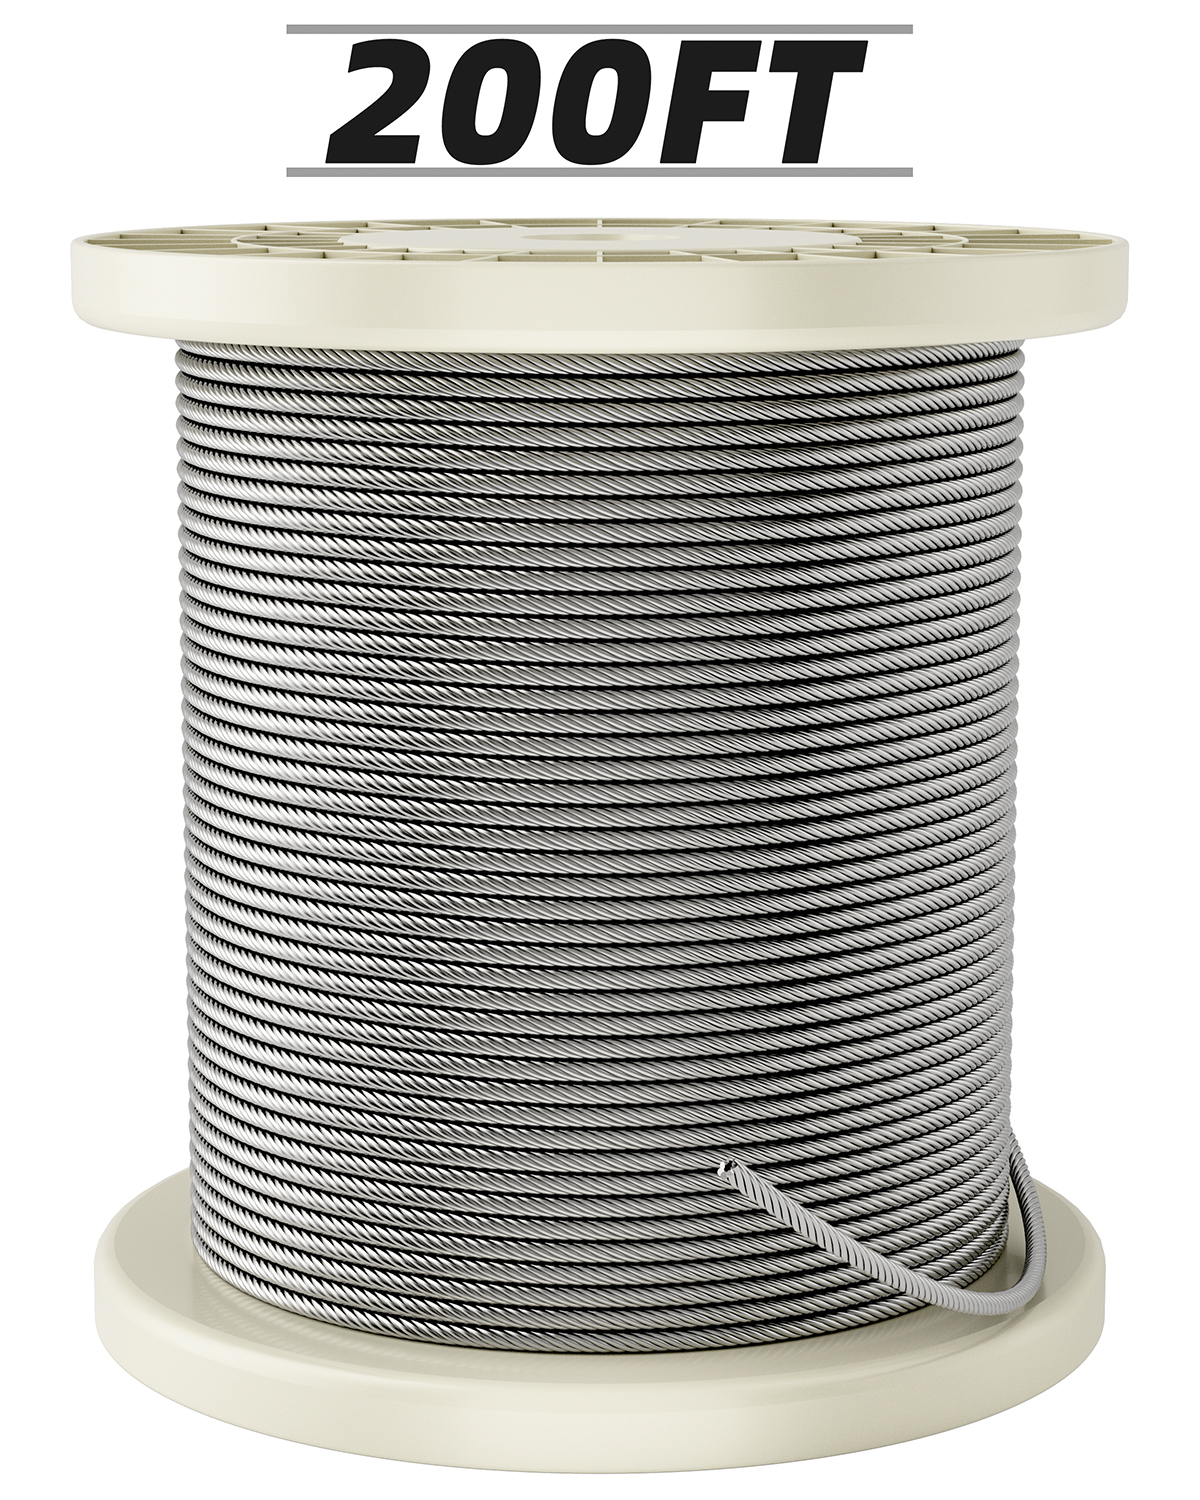 Fil-fresh 200FT 1/8 Stainless Steel Braided Cable, T316 Aircraft Cable for Deck Railing, 7 x 7 Strands Construction